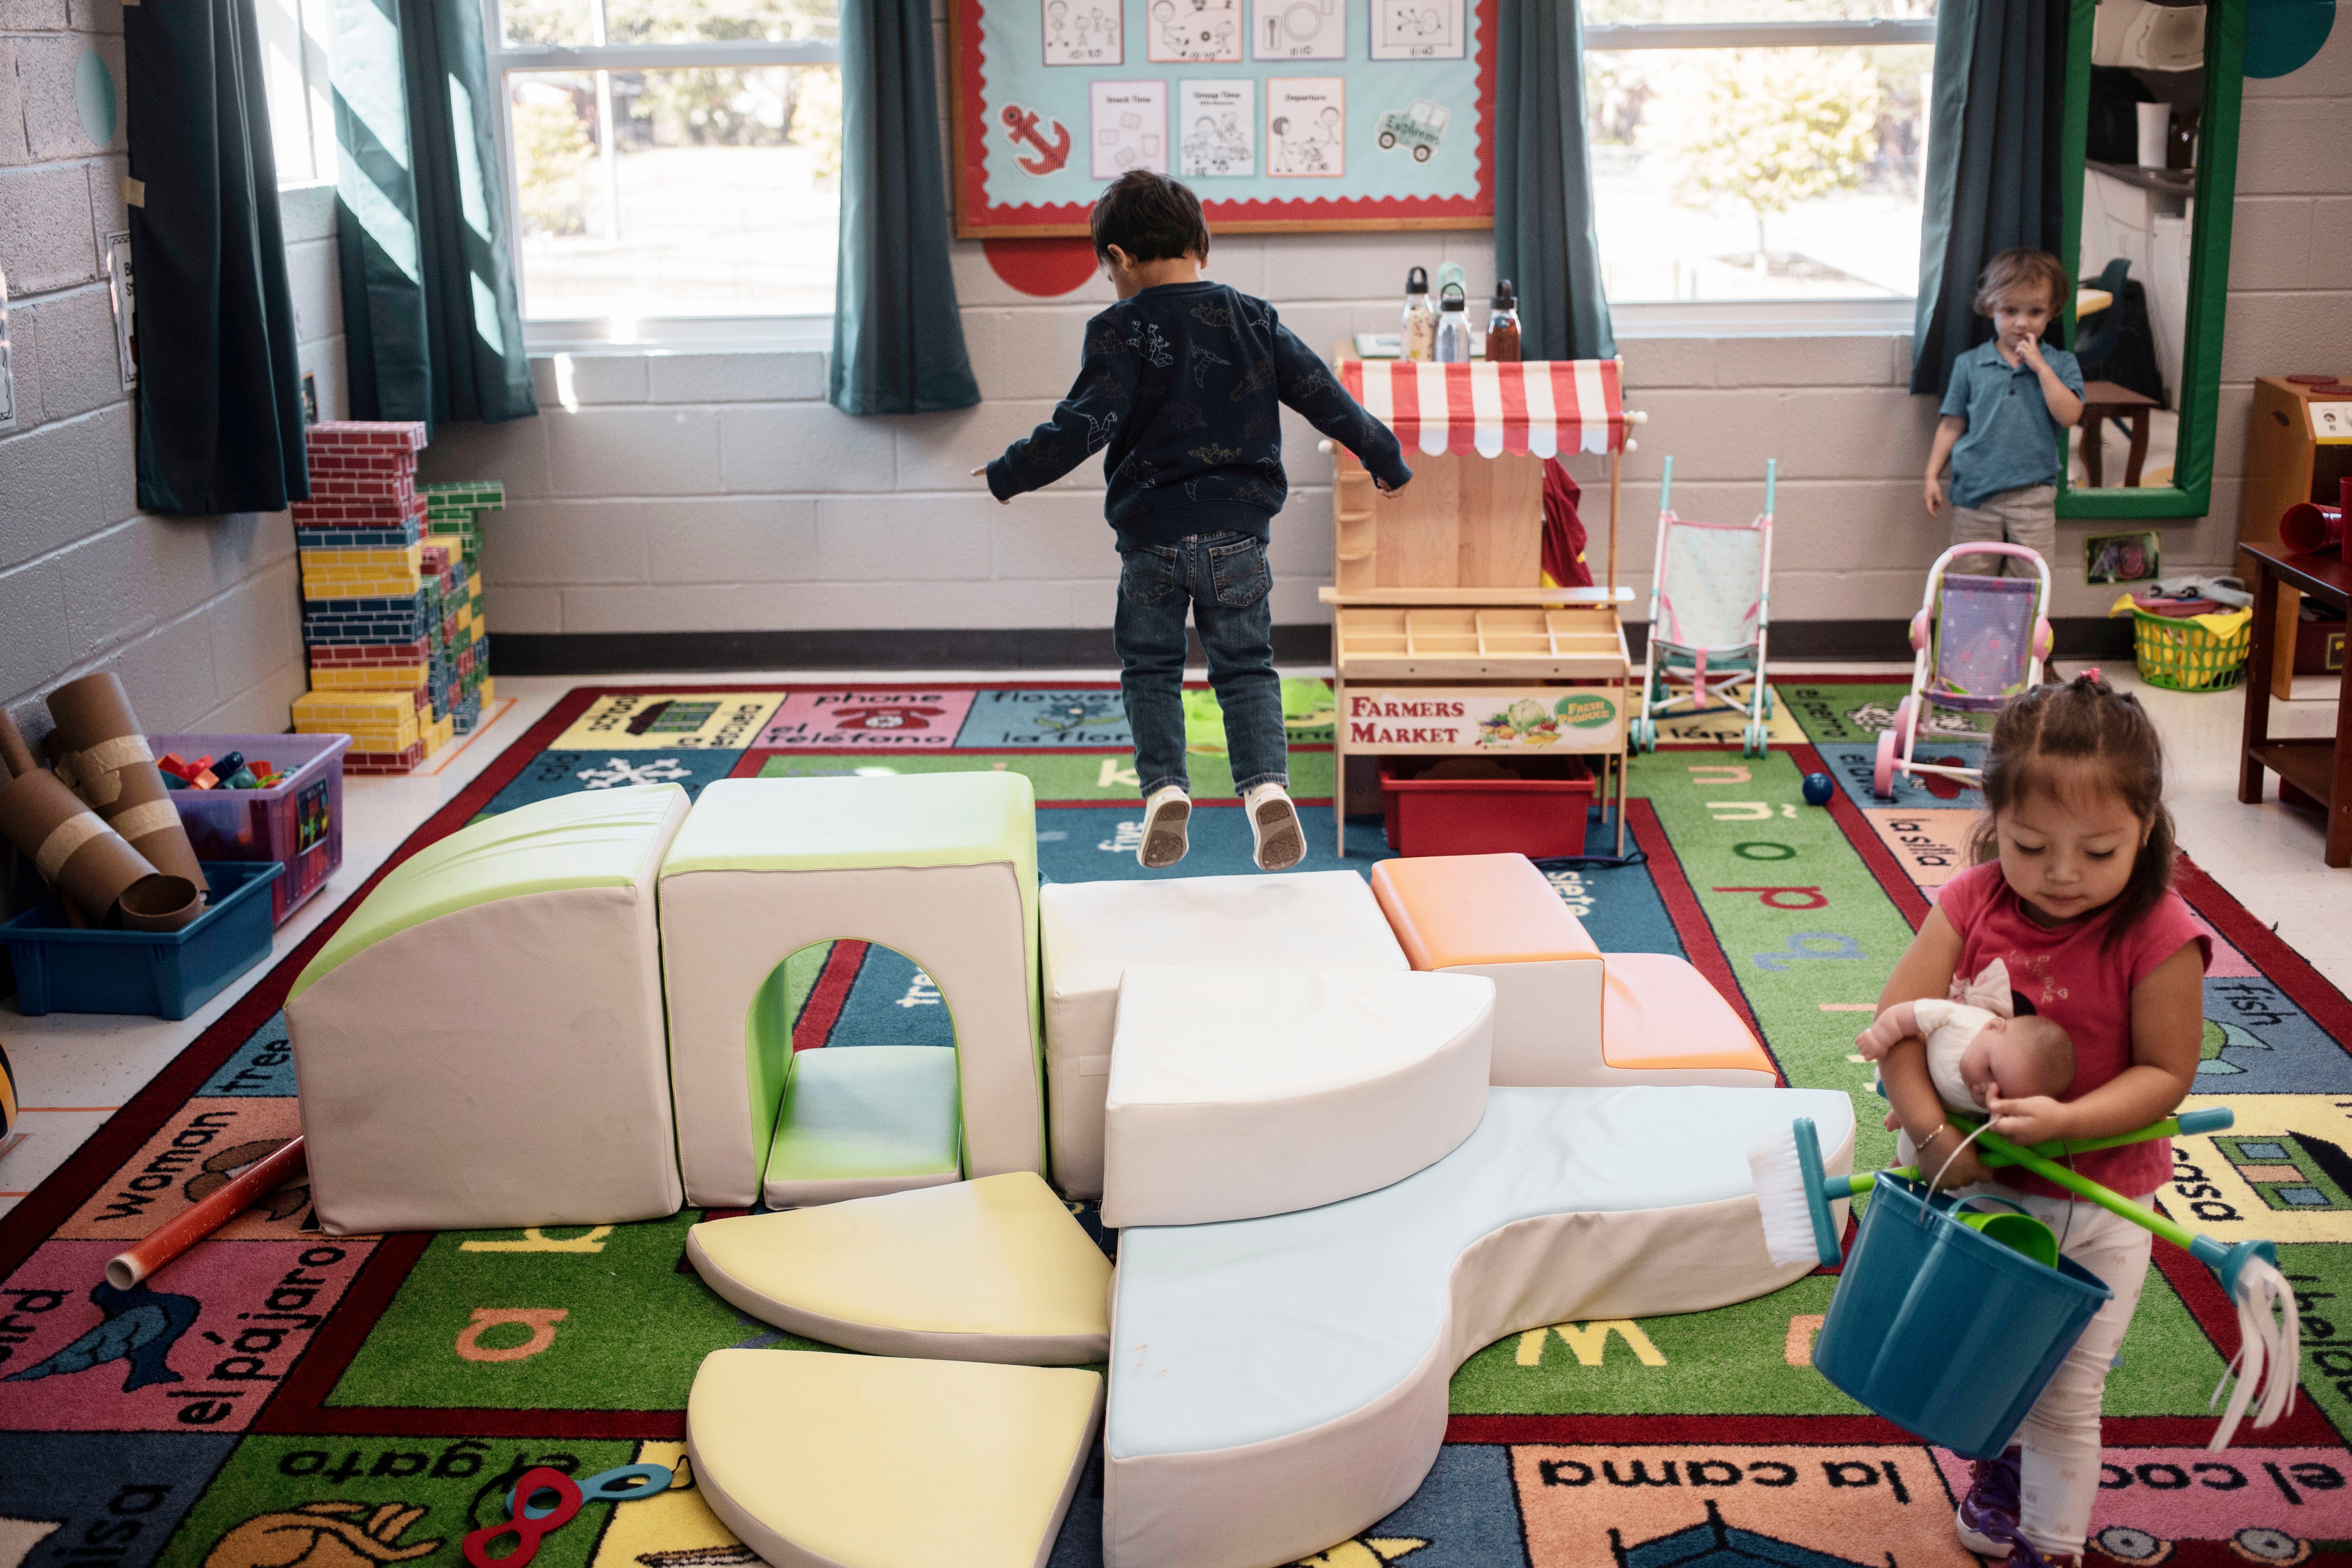 A little boy jumps off of a plush set of steps. A little girl walks with a doll and a bucket of toys in the foreground as another boy stands near a window in the back of the classroom.